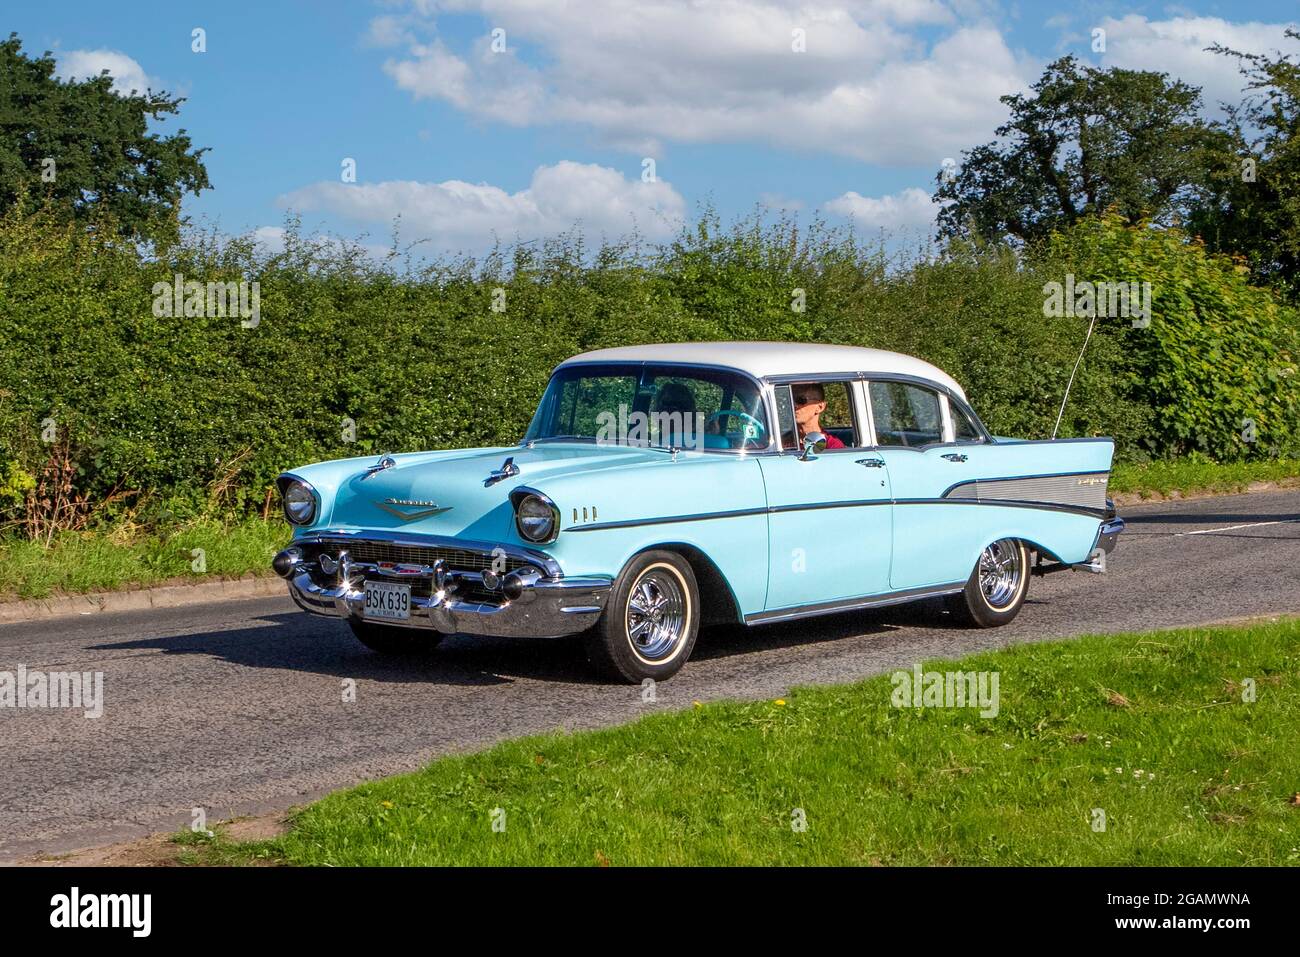 A 1957 50s CHEVROLET GMC BELAIR PETROL classic vintage car arriving at the Capesthorne Hall classic car show. Stock Photo